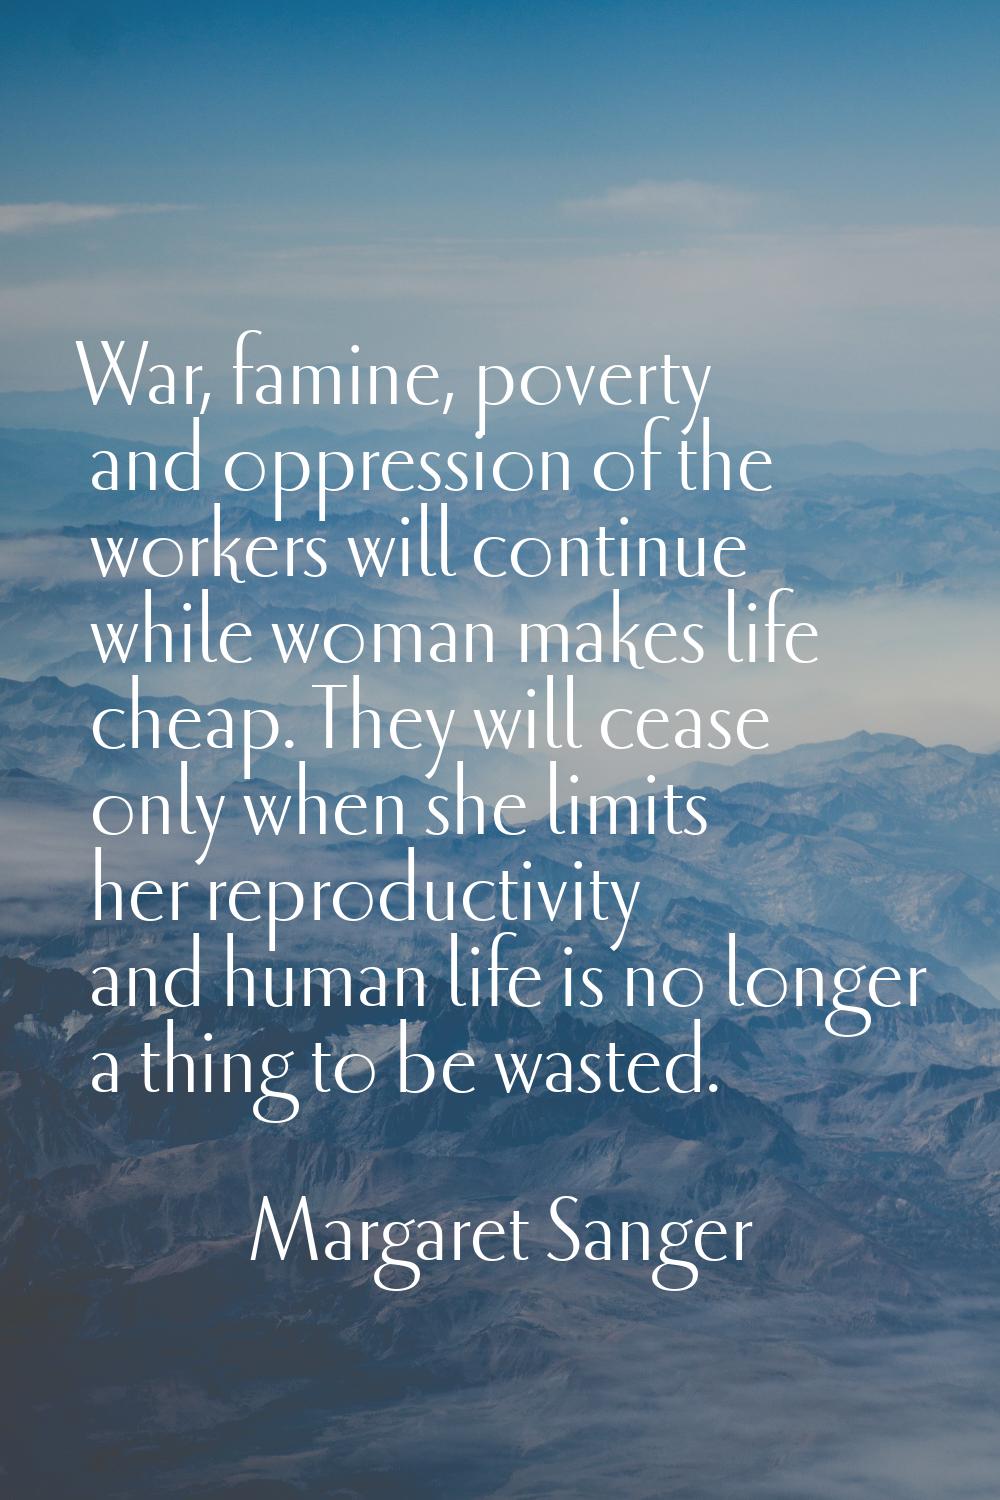 War, famine, poverty and oppression of the workers will continue while woman makes life cheap. They